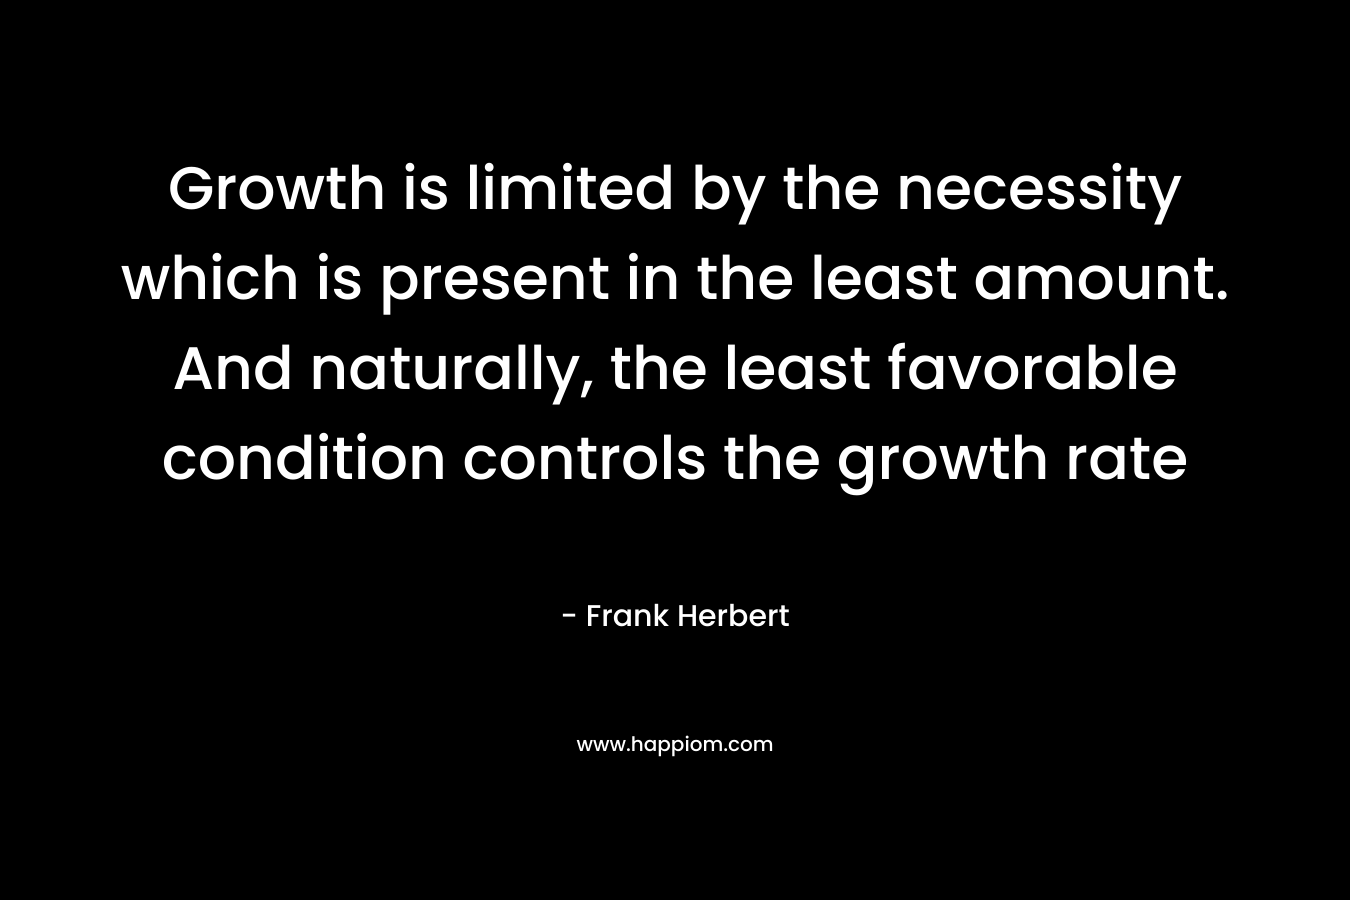 Growth is limited by the necessity which is present in the least amount. And naturally, the least favorable condition controls the growth rate